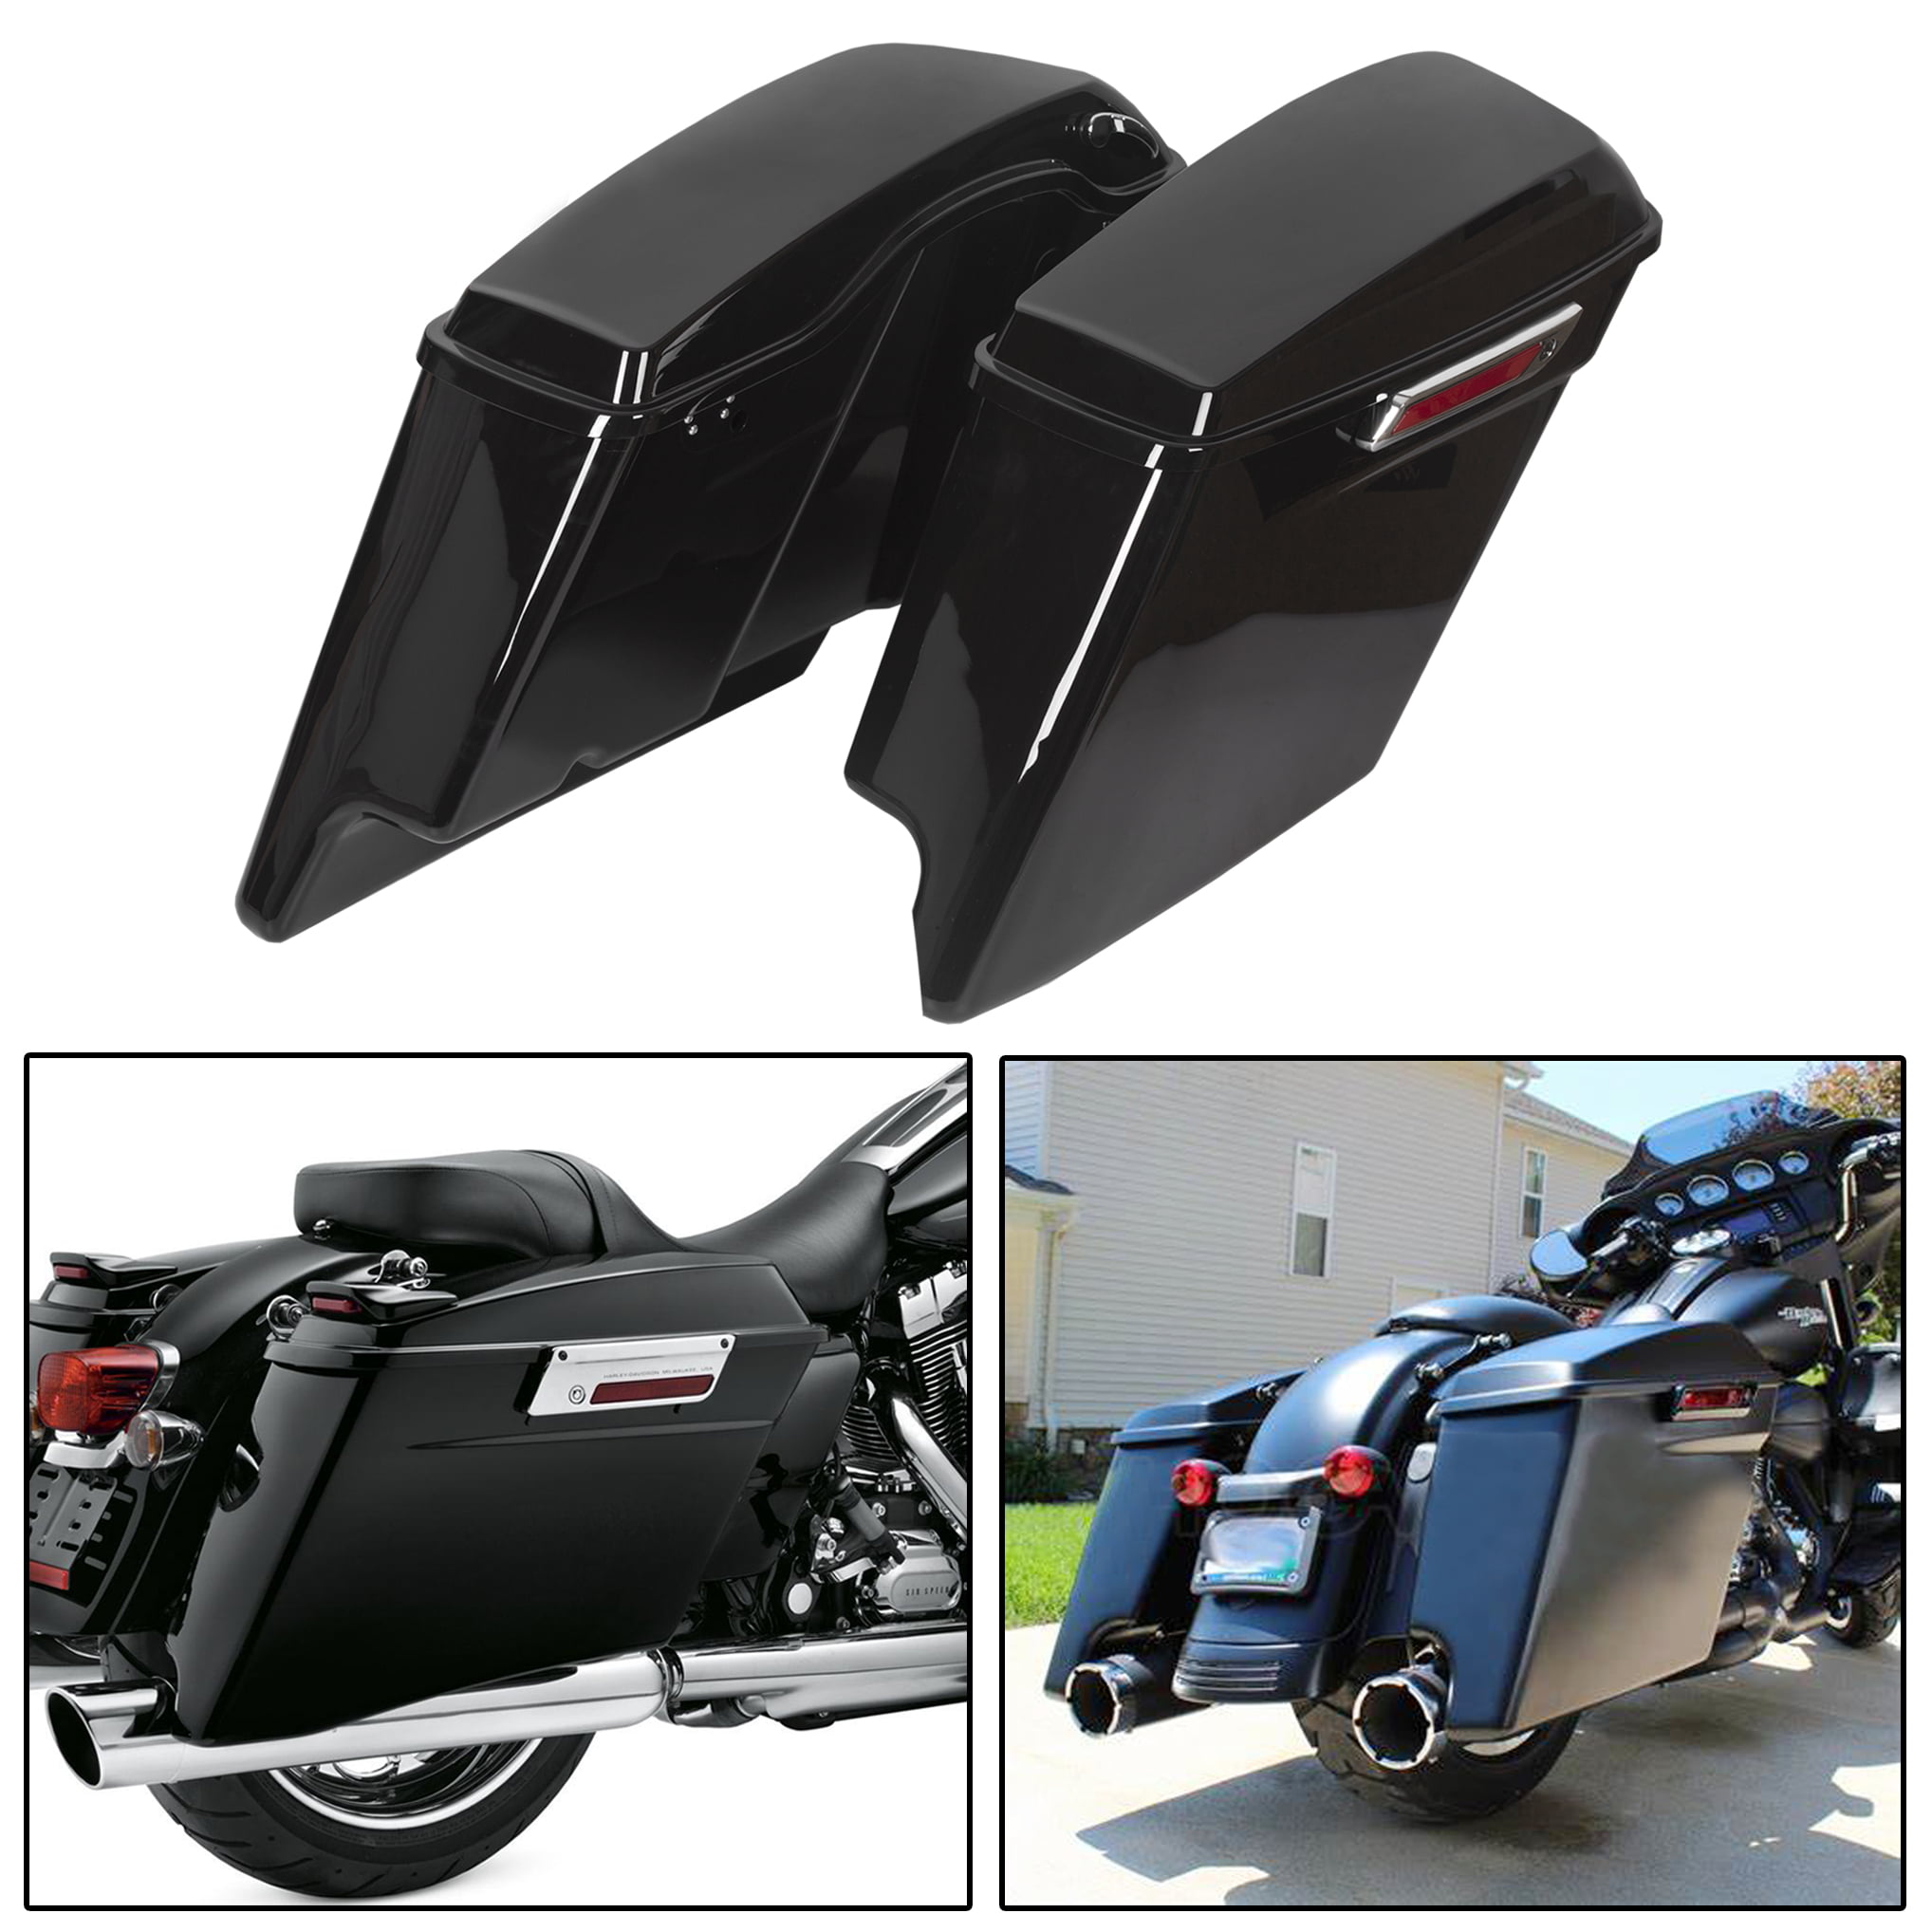 No Cut Out Mutazu Hard Saddlebag Extensions for 2014-up Harley Touring Model 